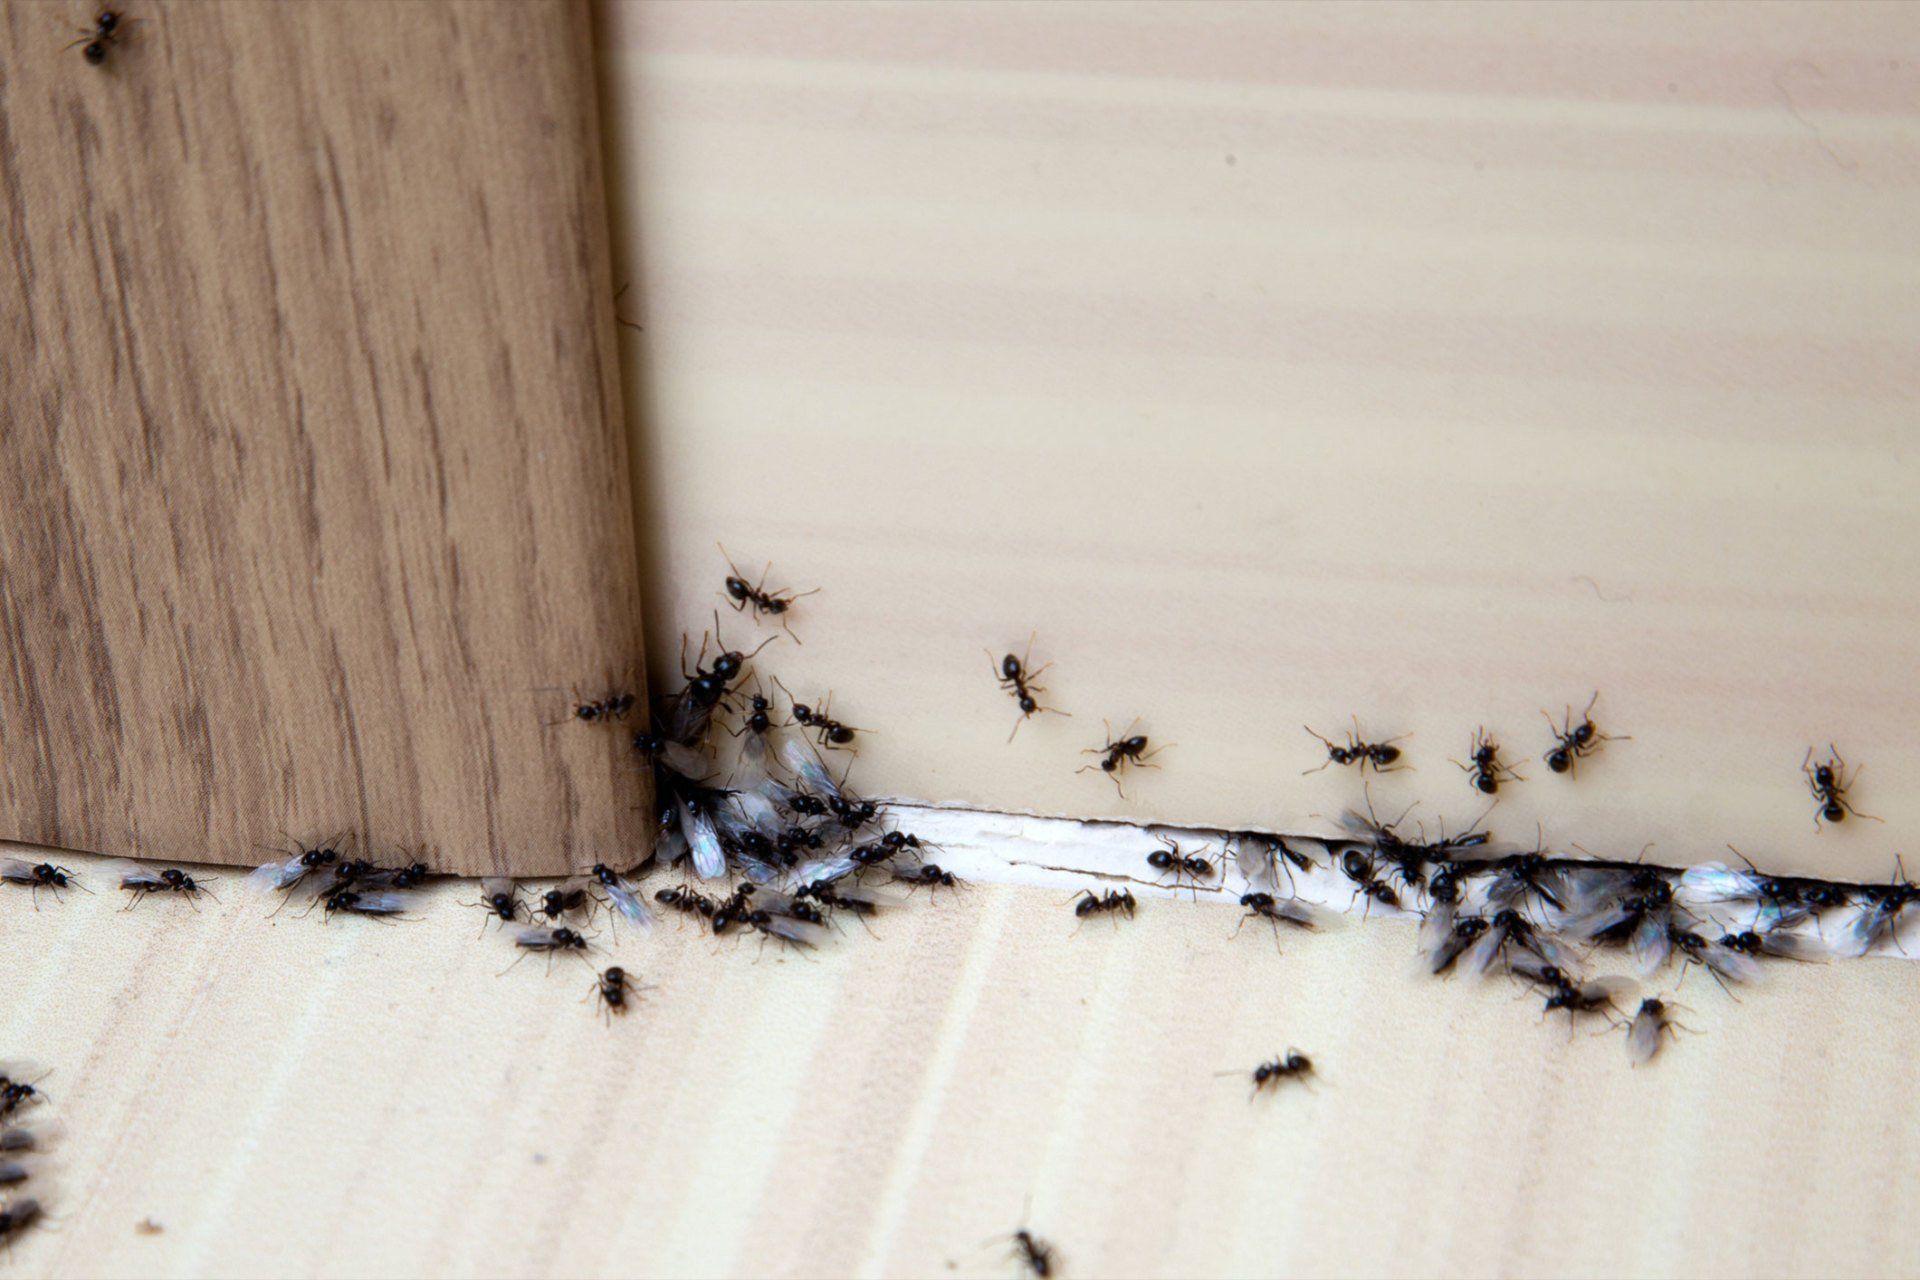 Pest Control — Ants Inside the House in Point Harbor, NC